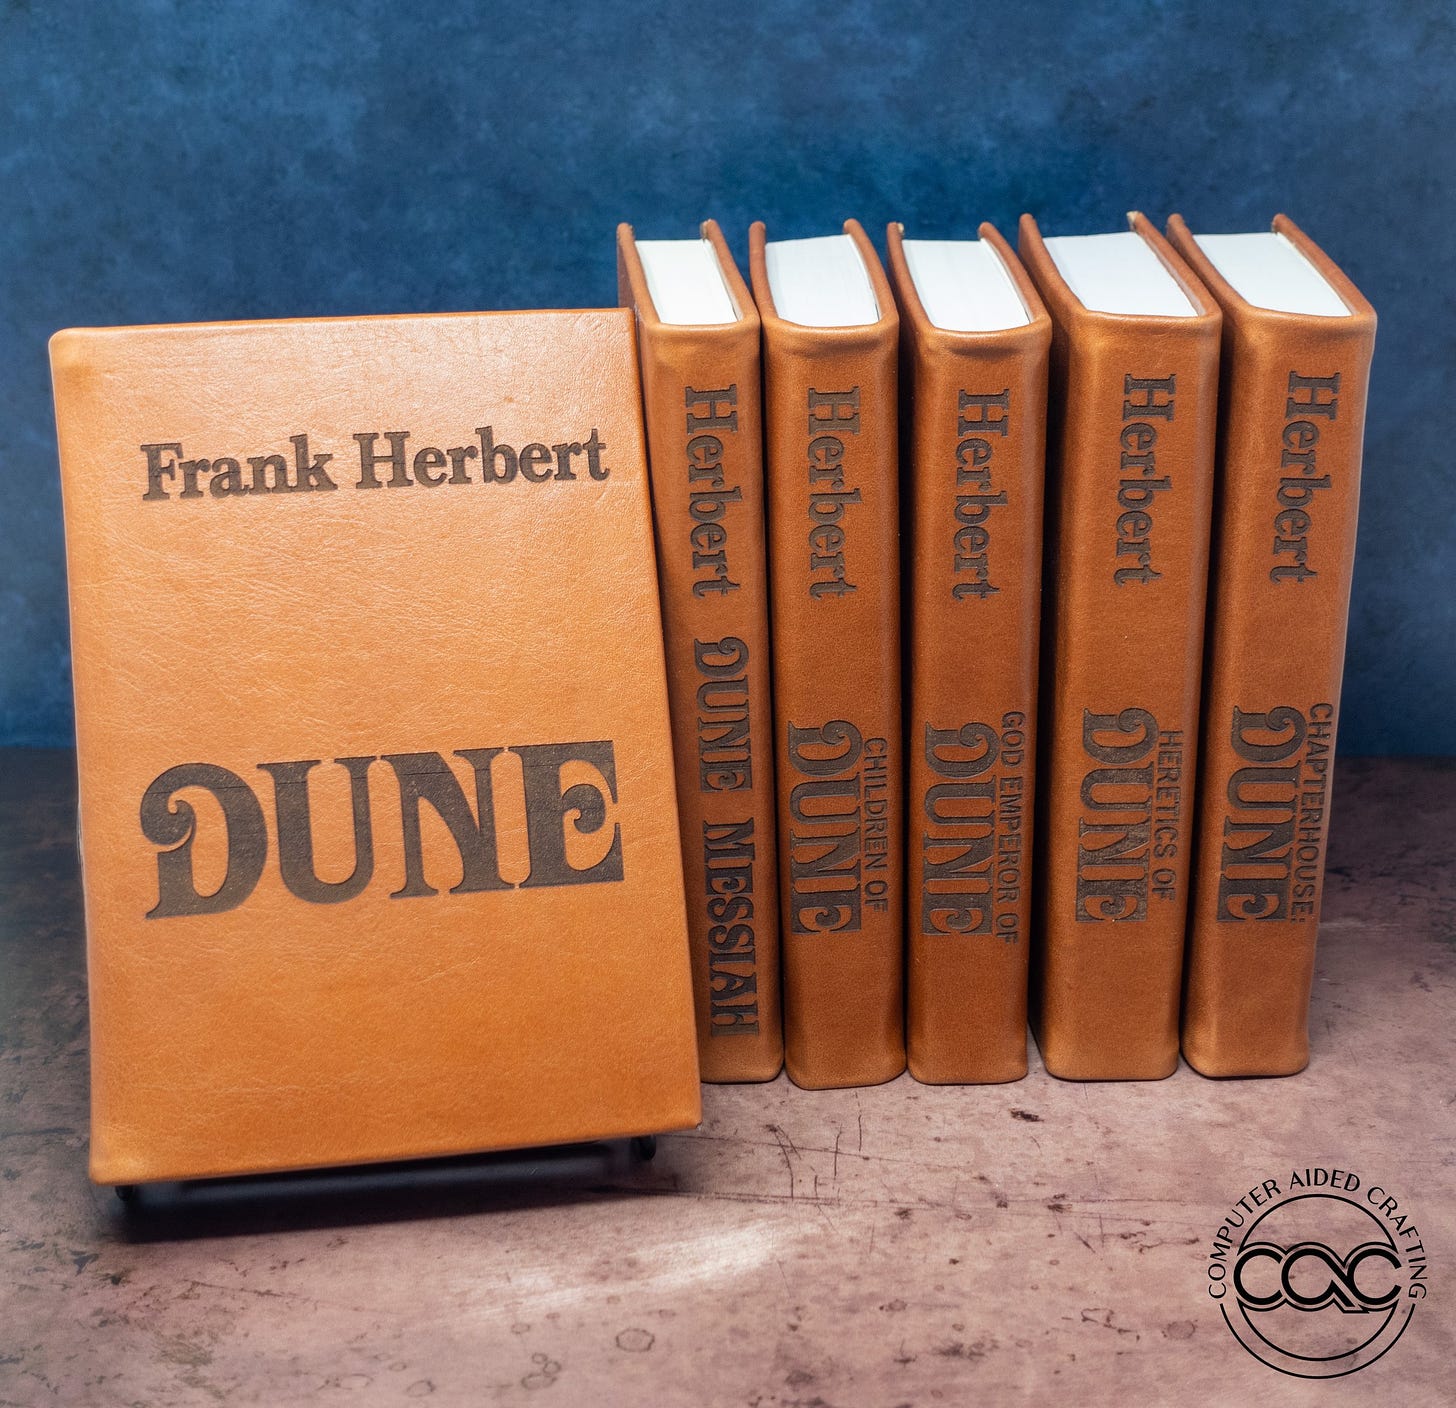 The Dune Saga by Frank Herbert Leather Bound — Computer Aided Crafting